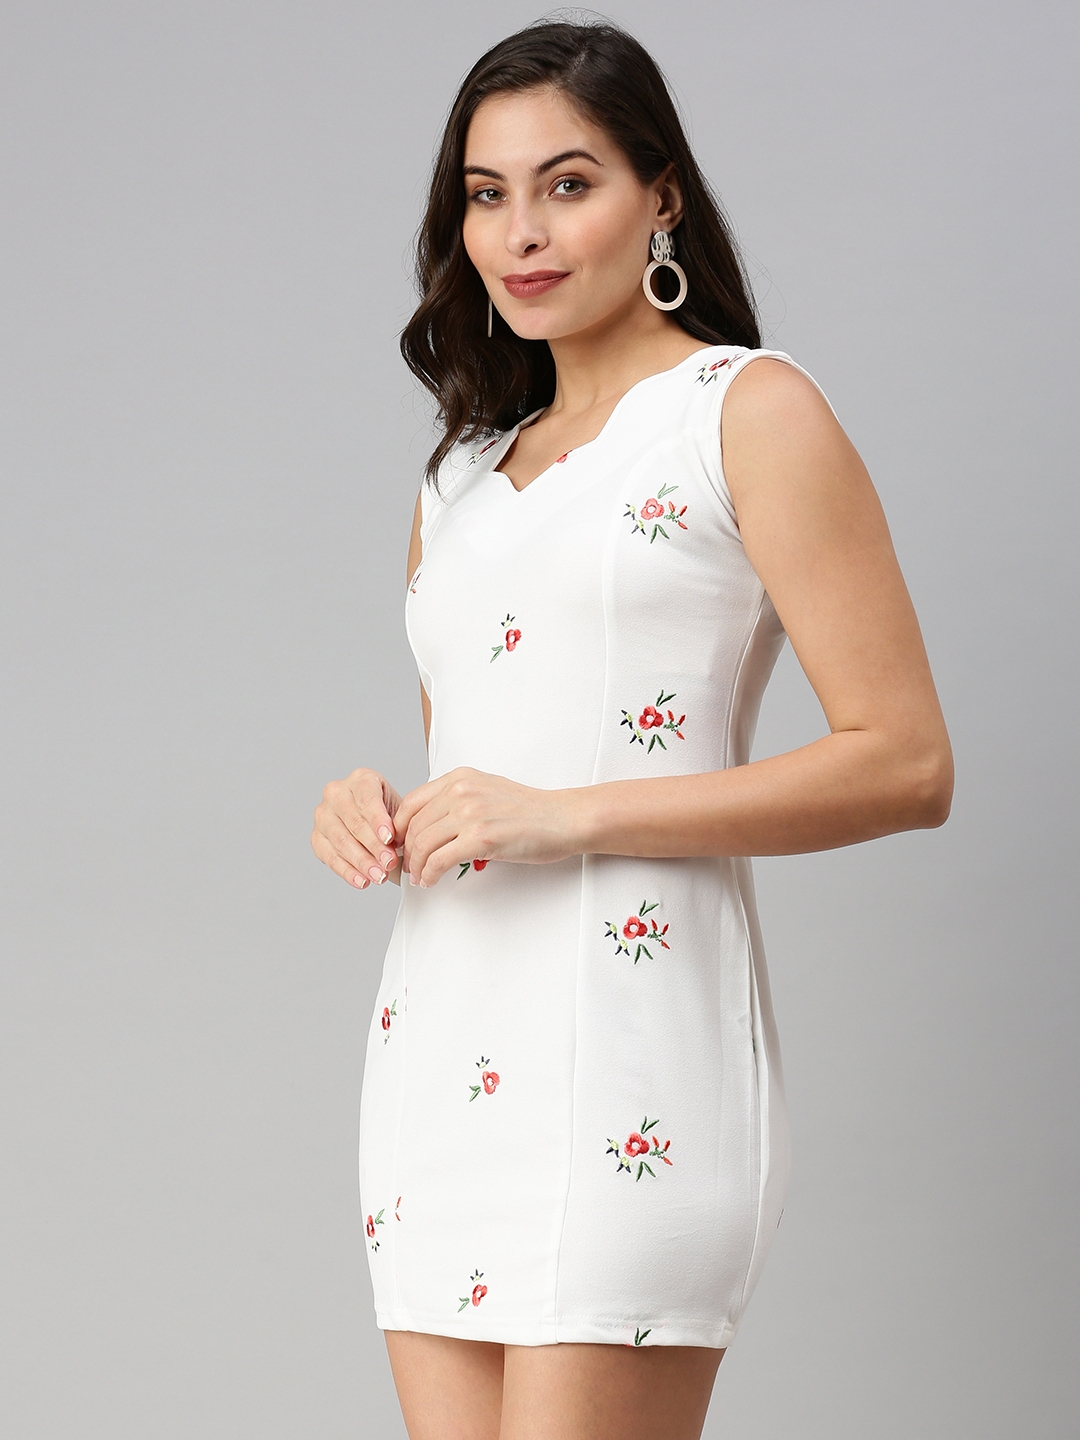 Women's White Polyester Solid Dresses